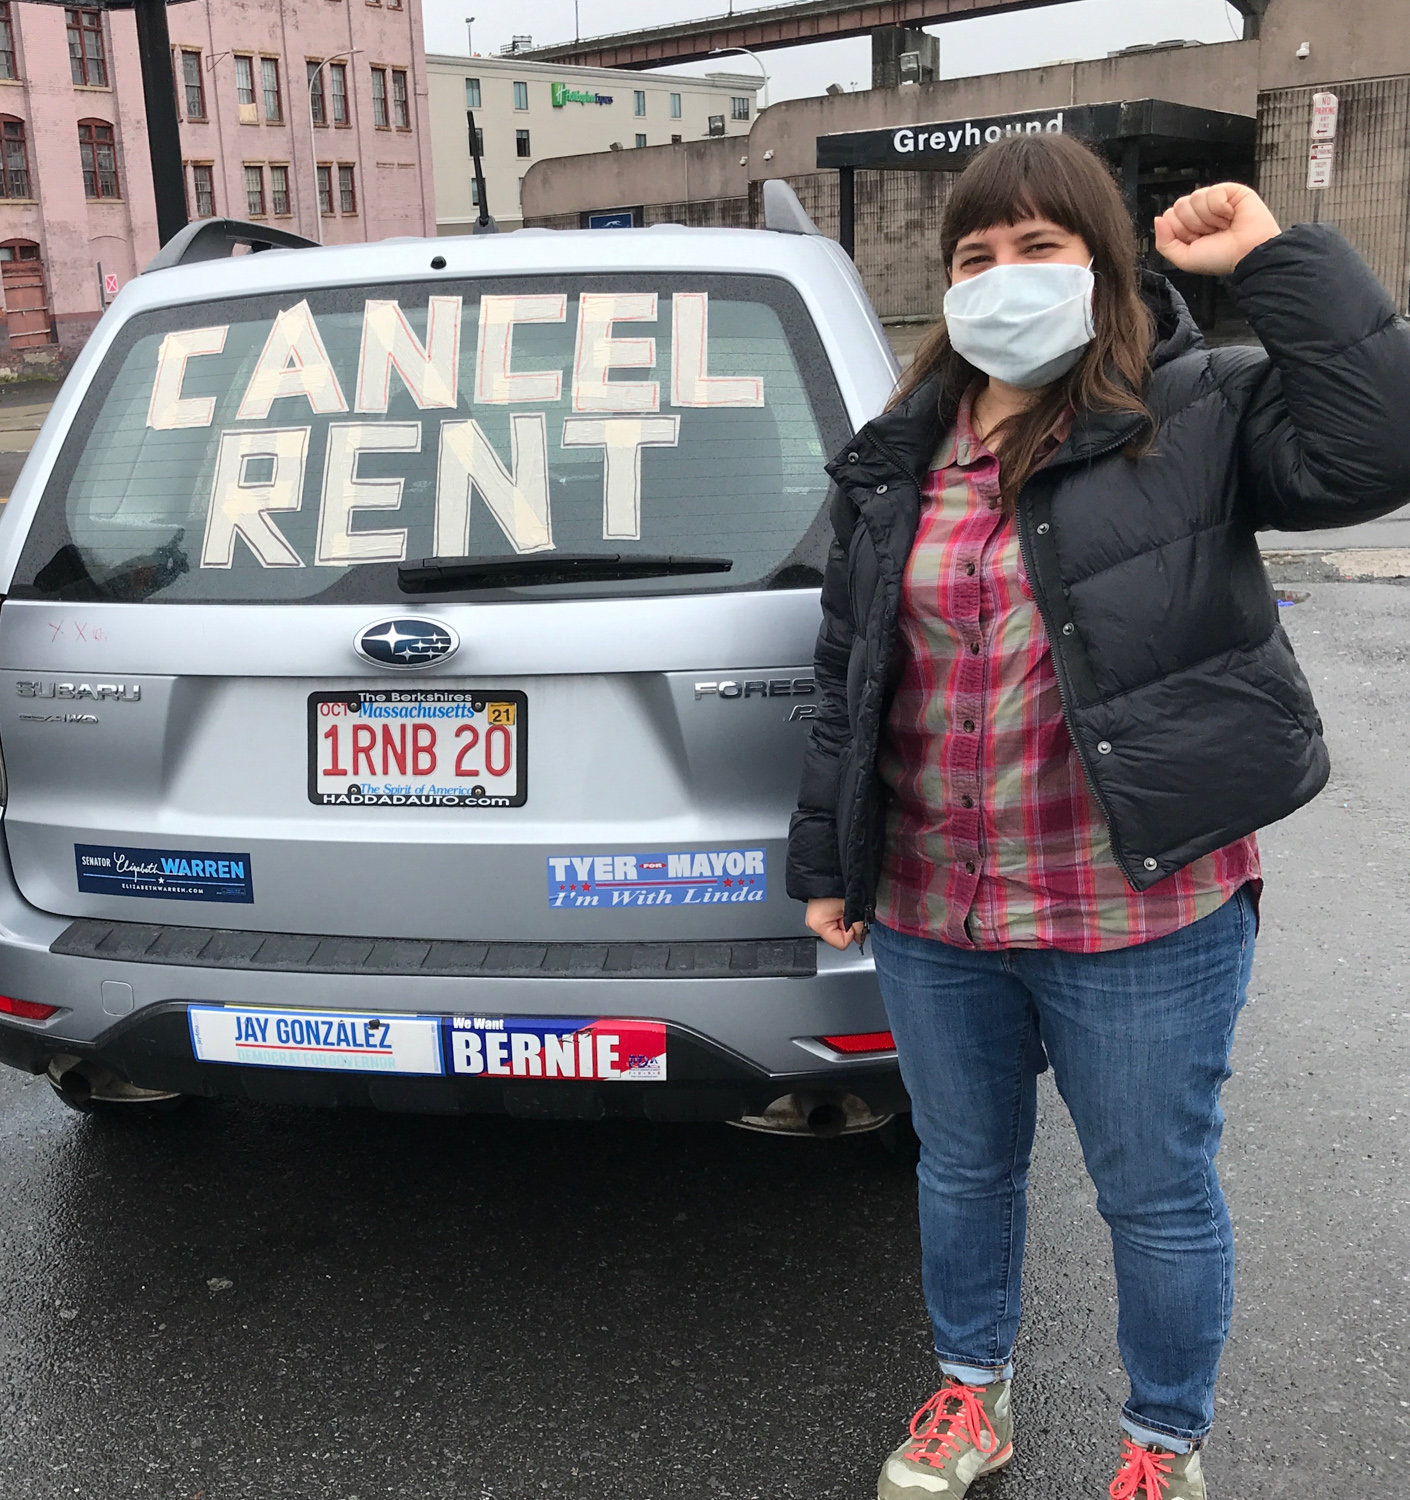 Met Council on Housing executive director Ava Farkas wants the state to suspend rent to help beleaguered tenants citywide who are unable to pay rent and who fear eviction at the end of a moratorium the governor enacted at the start of the coronavirus pandemic.